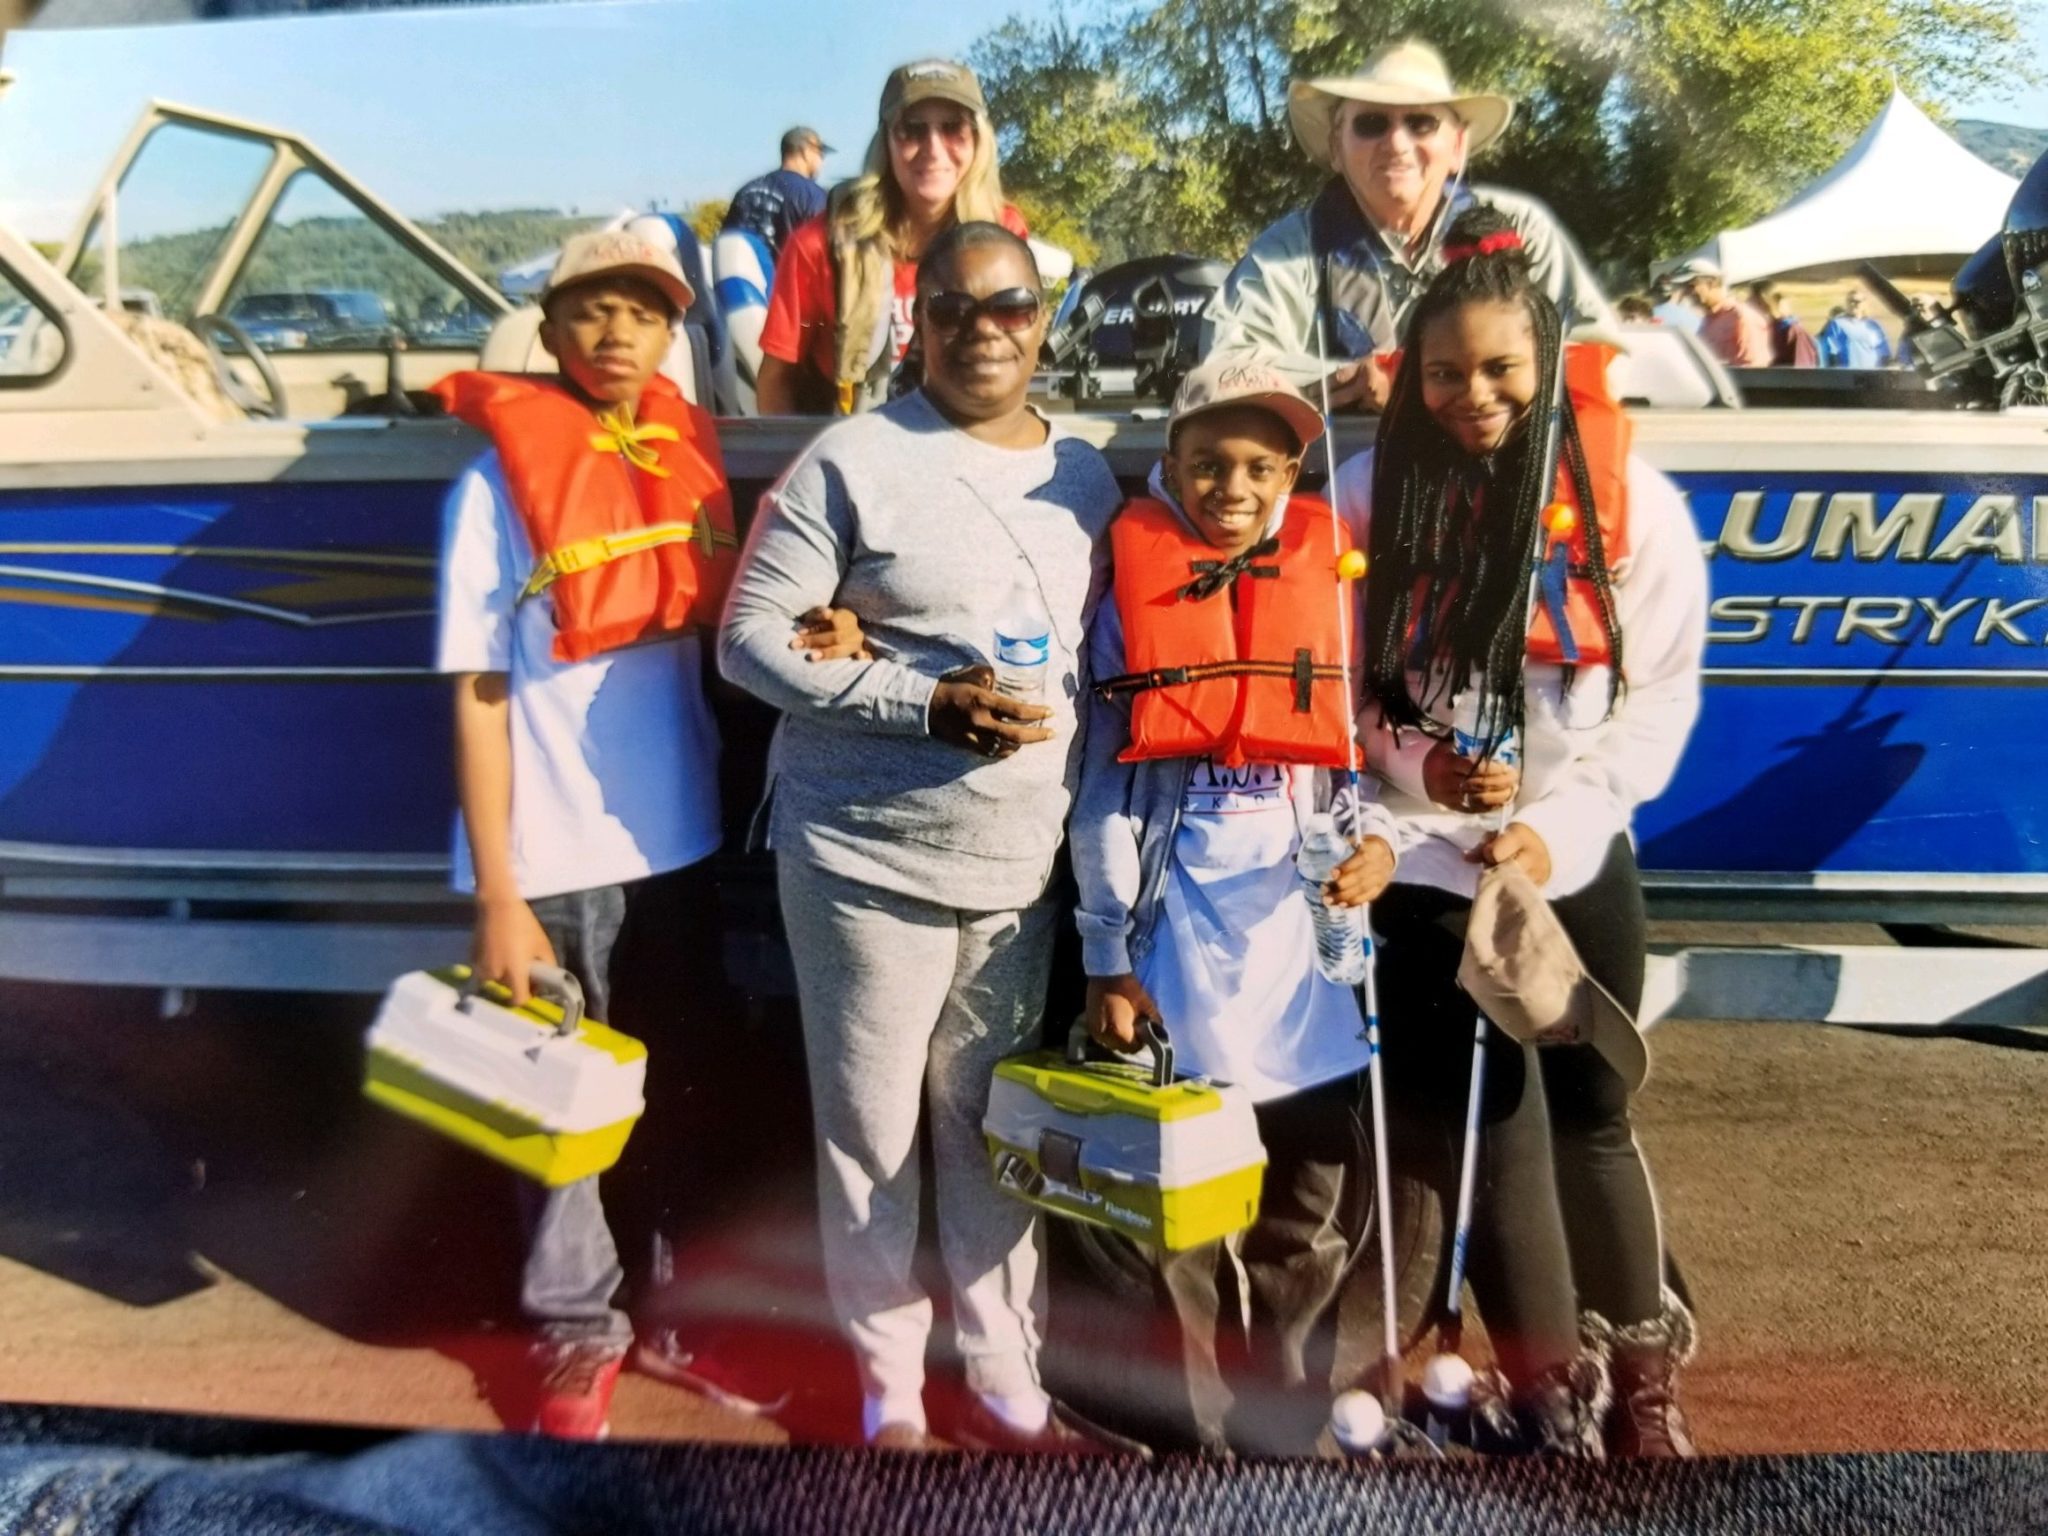 How a C.A.S.T. for Kids Fishing Event Can Make You Feel Like Family